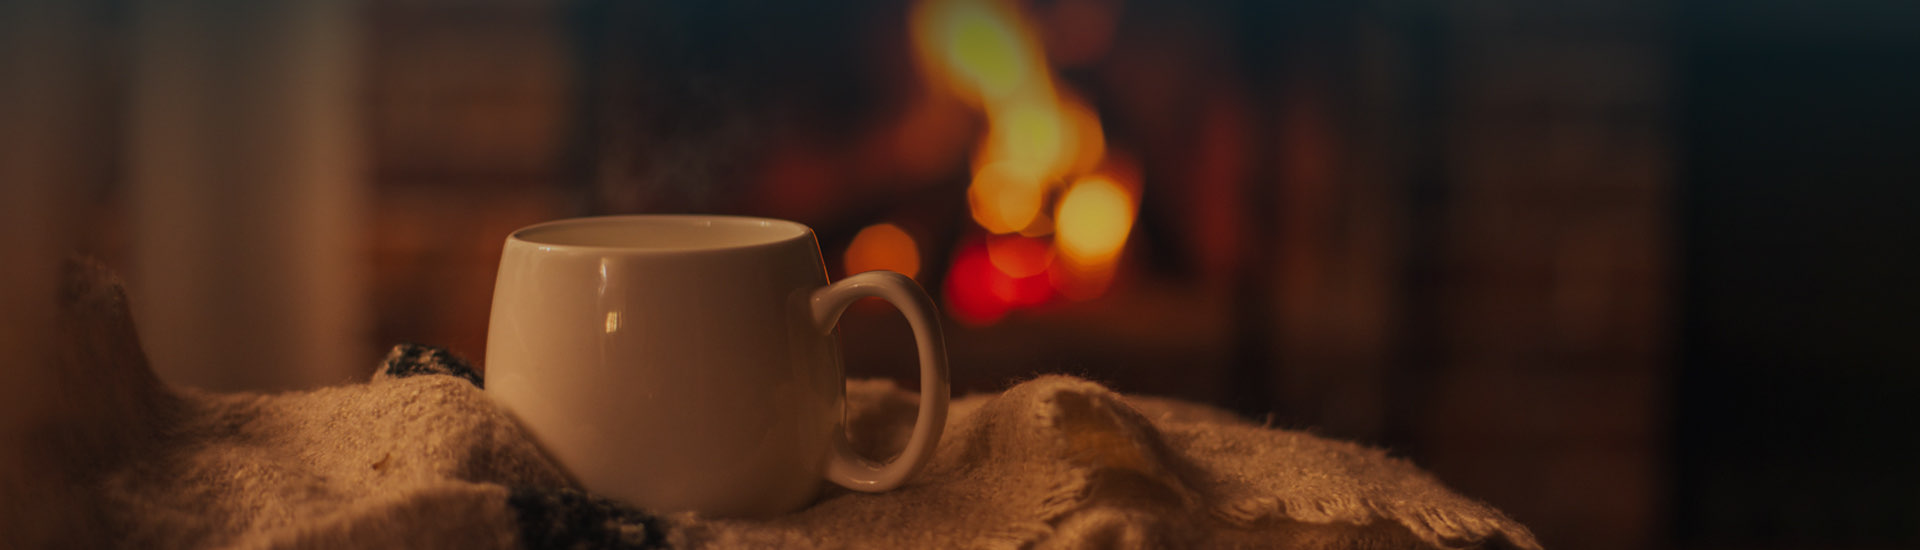 close up view of coffee cup with fireplace in the background hero